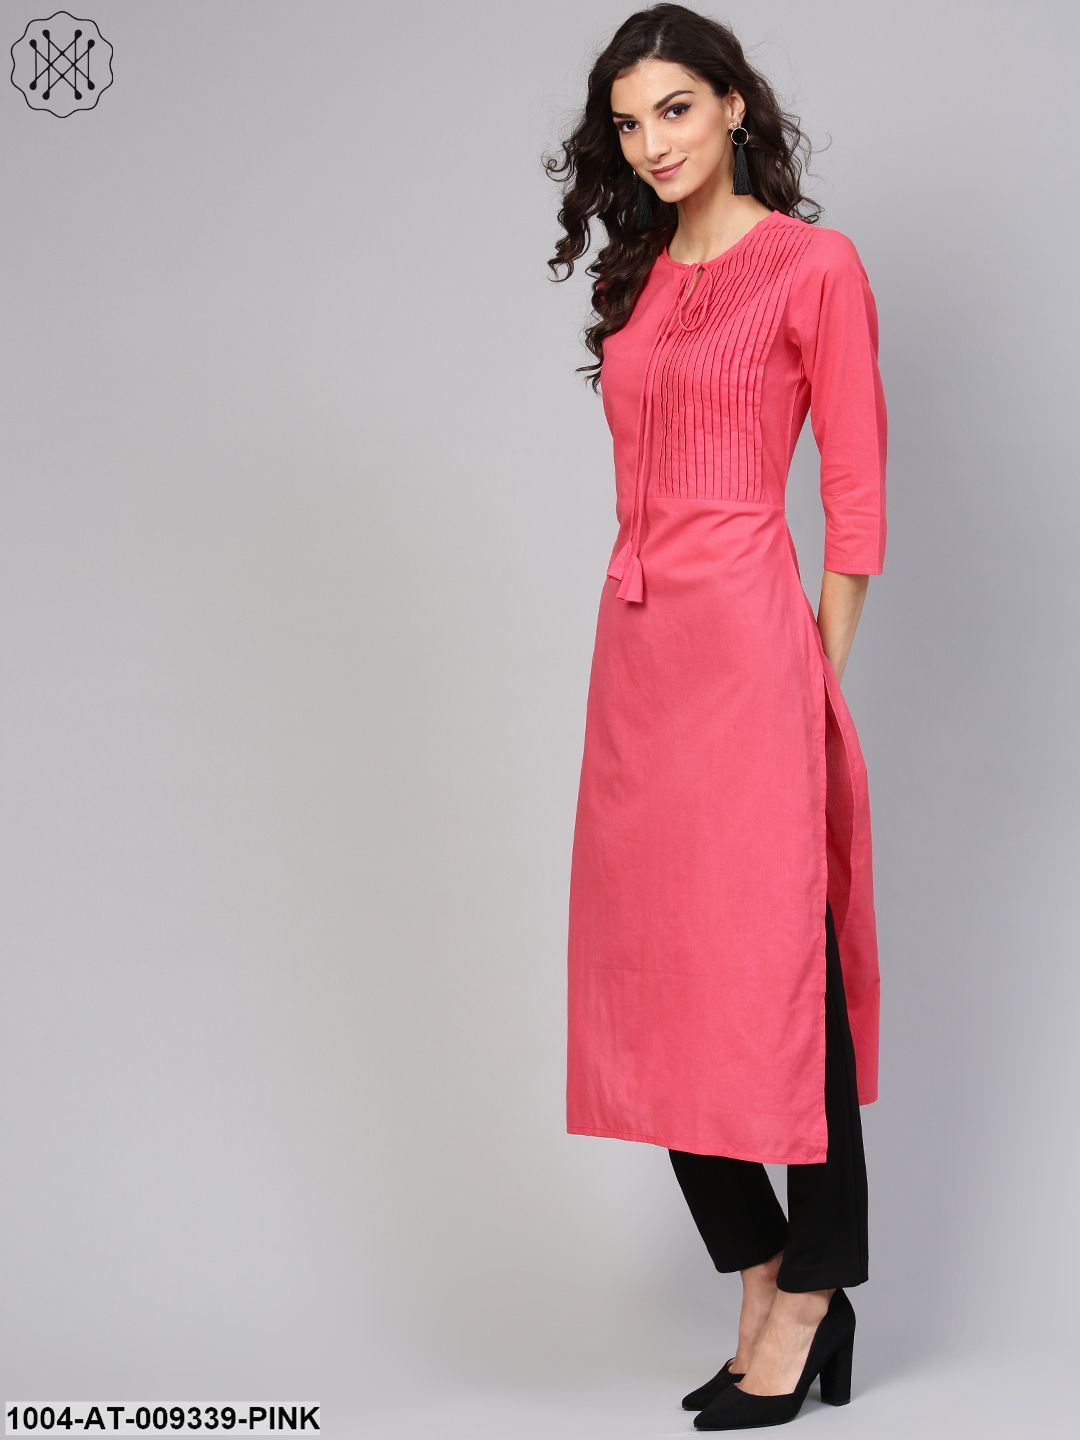 Cotton Pink Even Pleated Yoke With Keyhole Neckline & 3/4 Sleeves